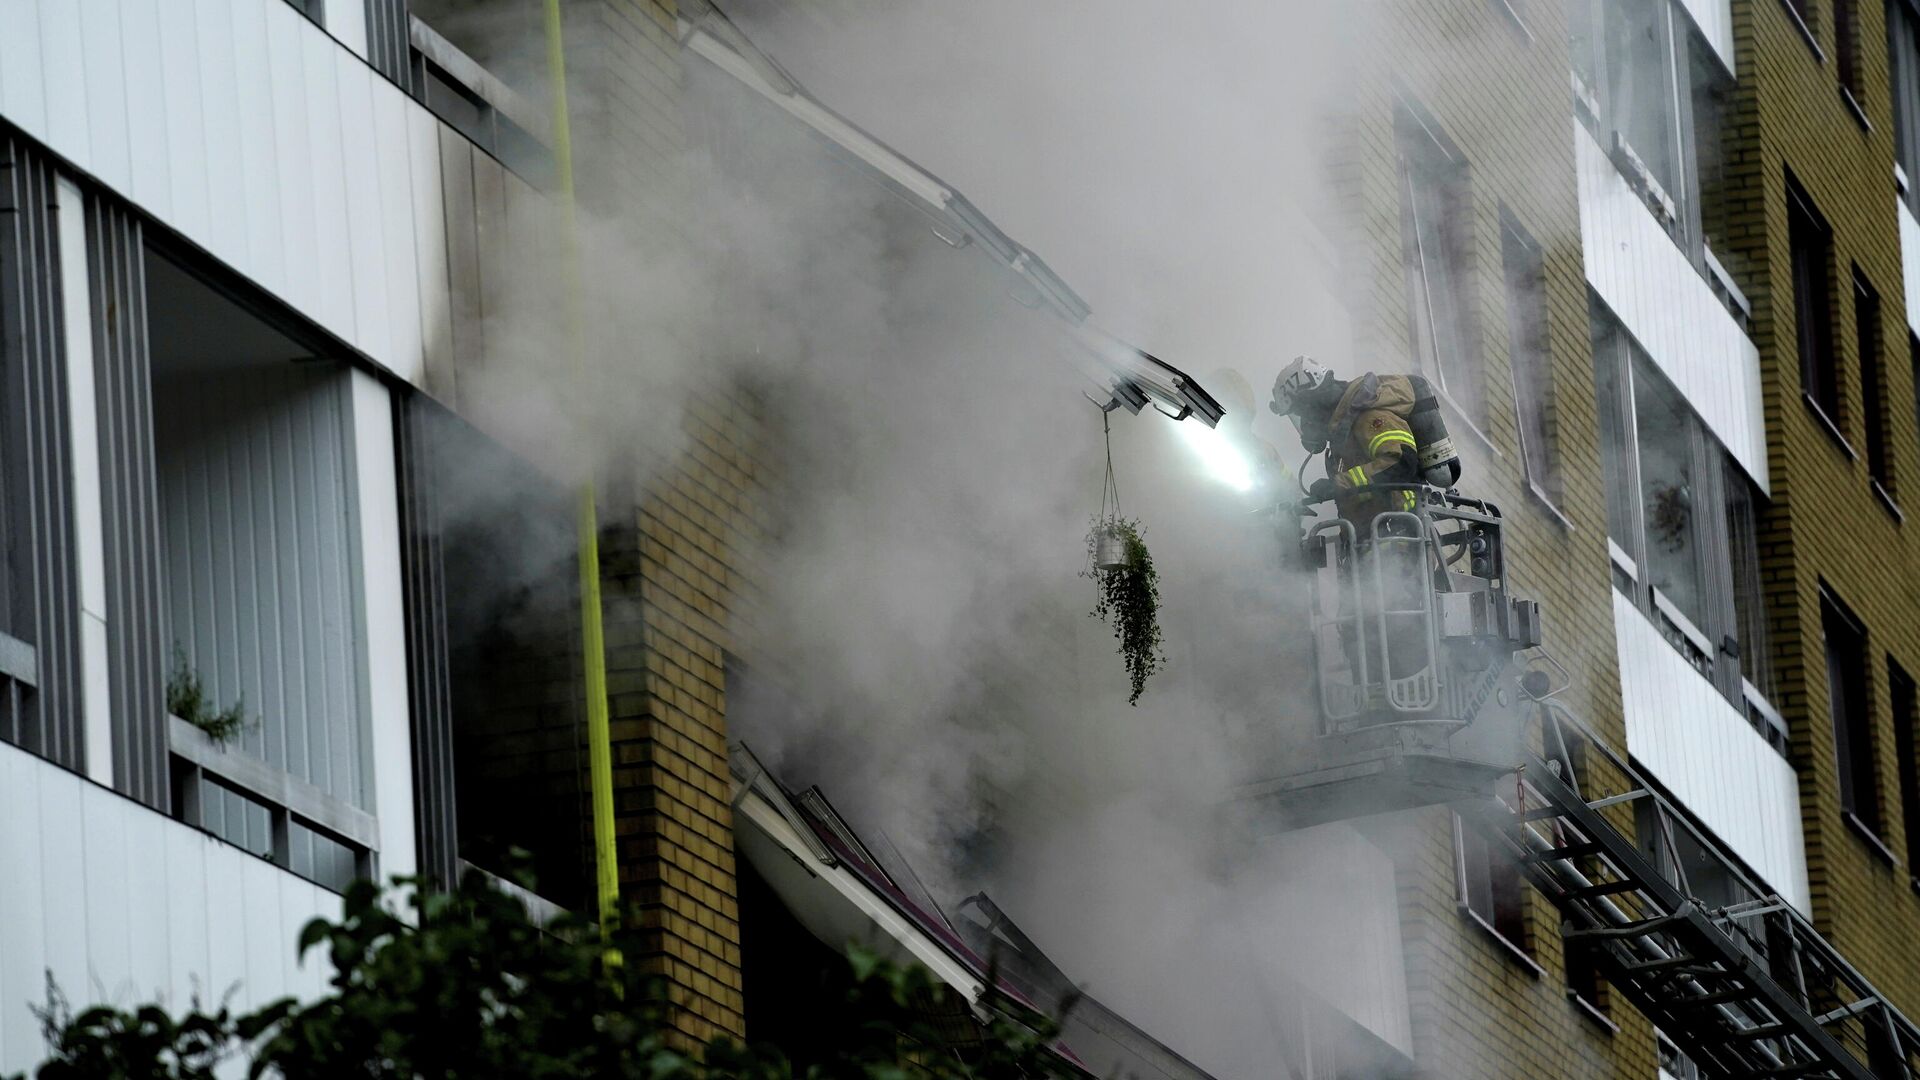 An emergency services crew works to evacuate people and put out fire as smoke comes out of windows after an explosion hit an apartment building in Annedal, central Gothenburg, Sweden September 28, 2021 - Sputnik International, 1920, 28.09.2021